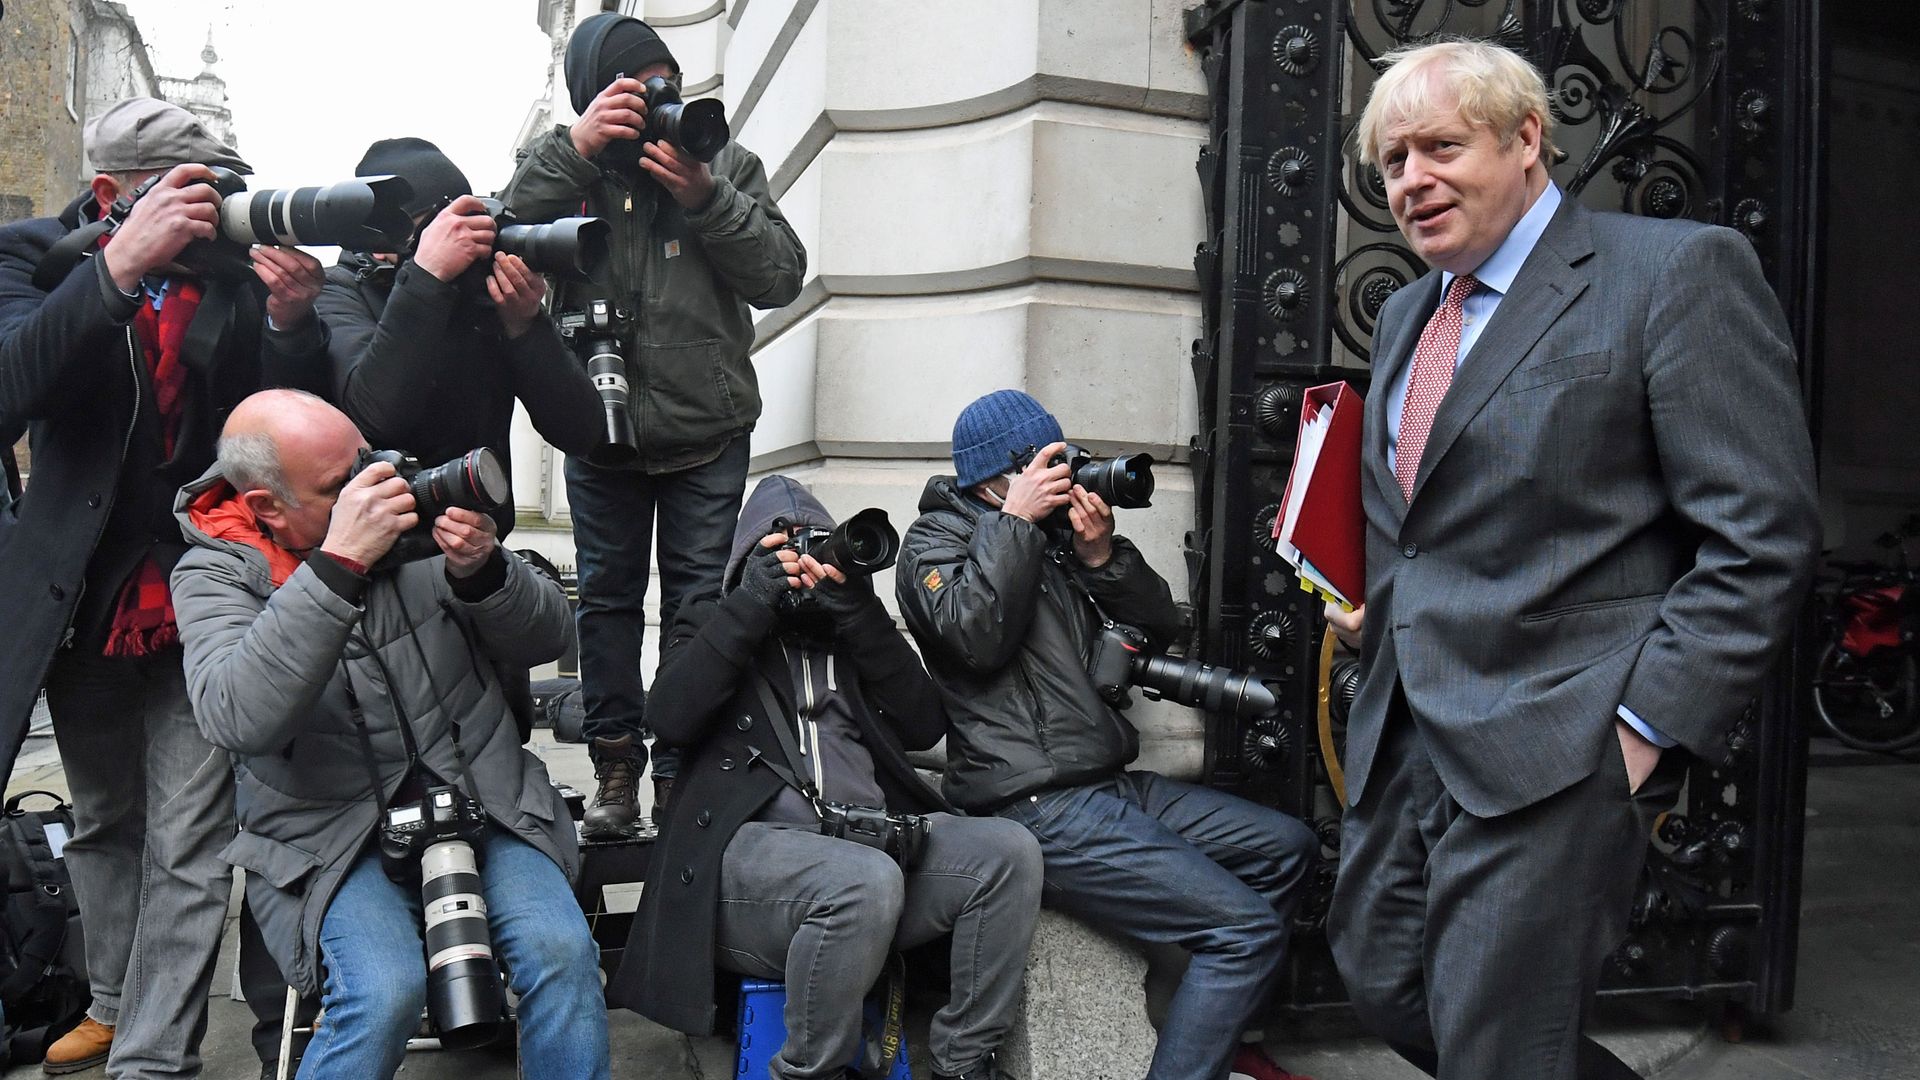 Prime minister Boris Johnson in Downing Street, London, after leaving a Cabinet meeting at the Foreign and Commonwealth Office (FCO). - Credit: PA